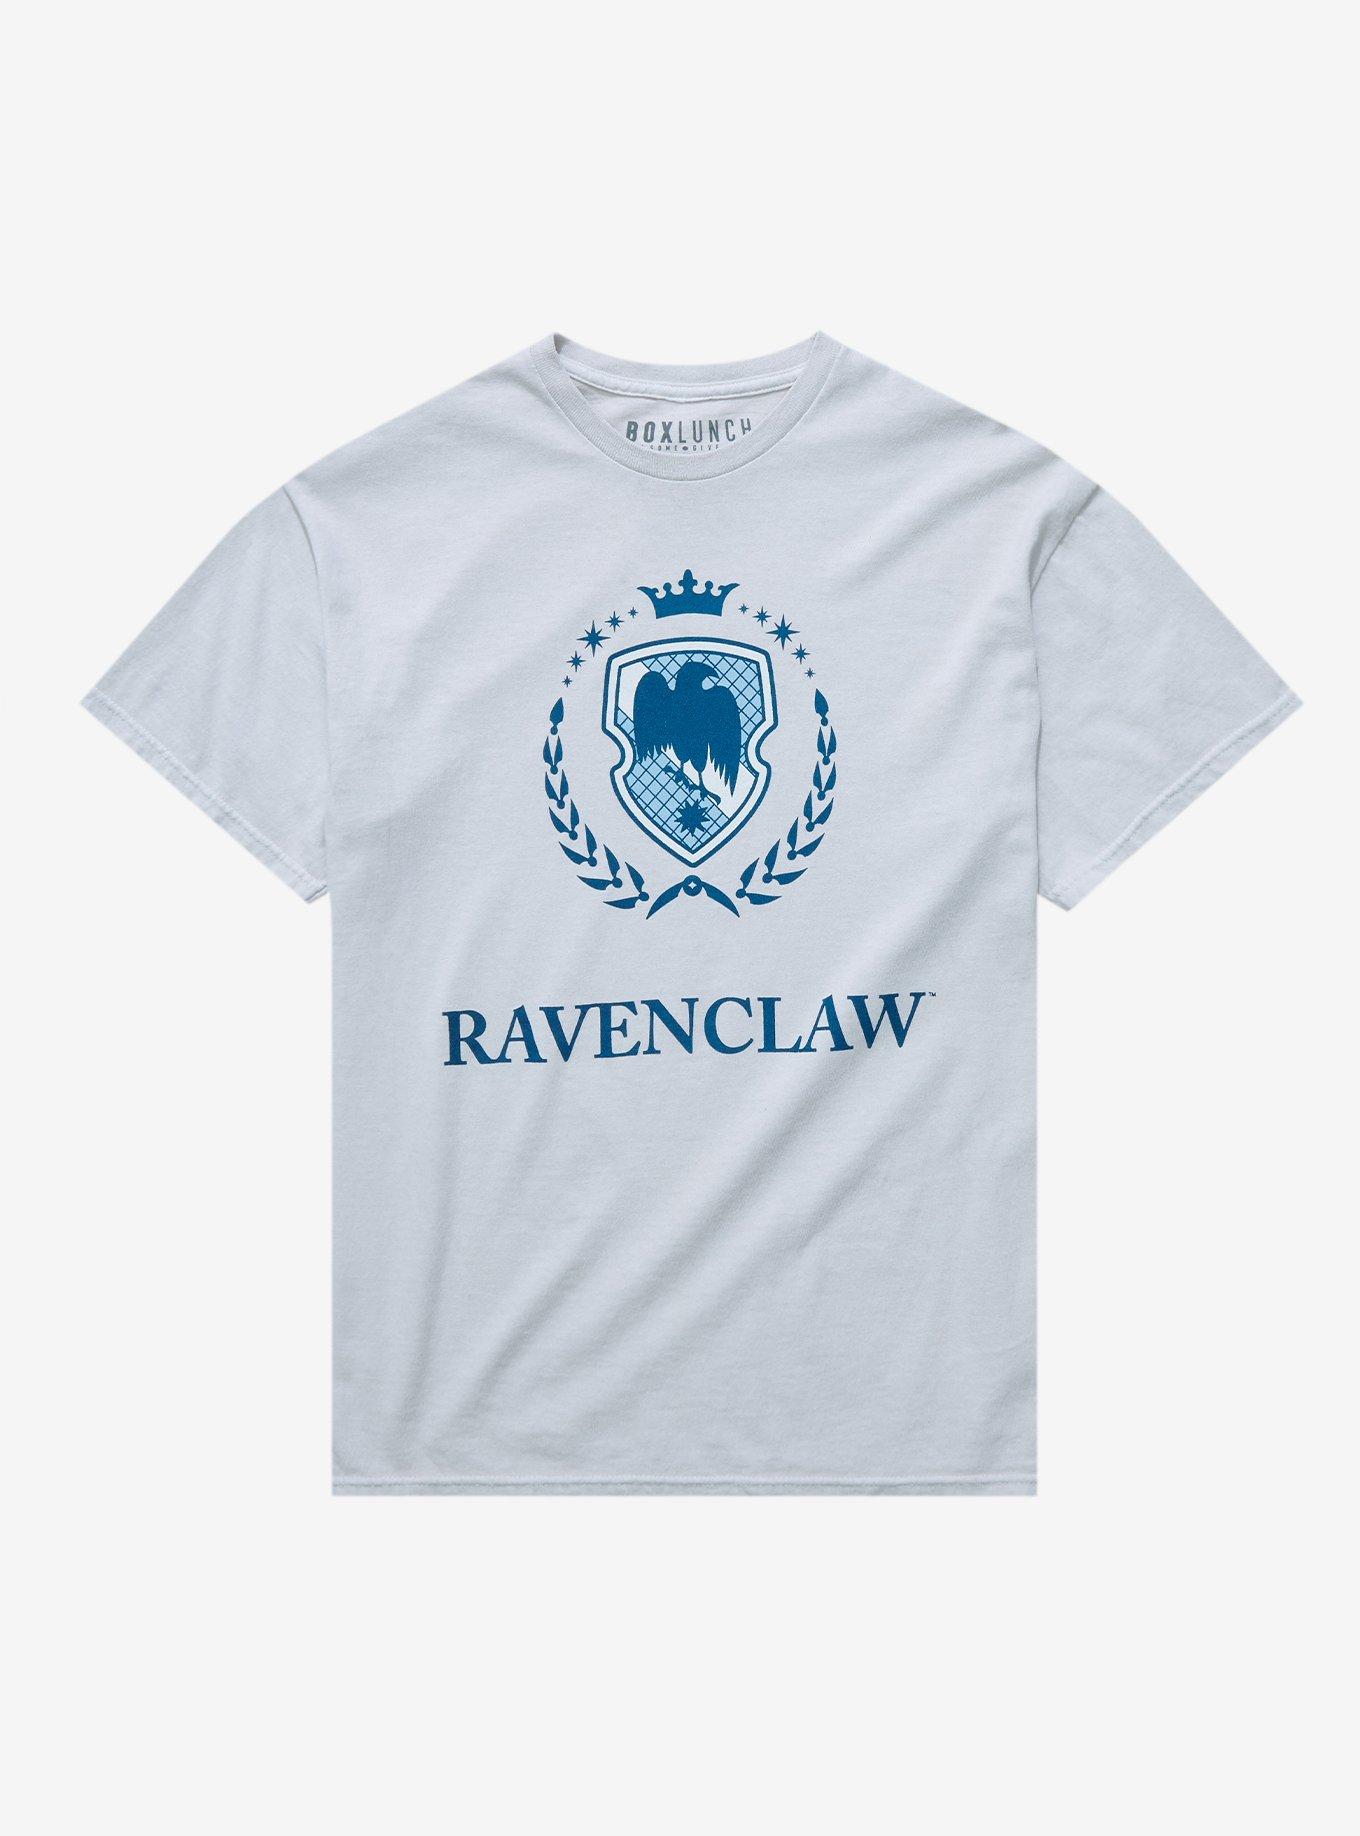 Harry Crest Potter - BoxLunch | BoxLunch Ravenclaw Exclusive Tonal T-Shirt